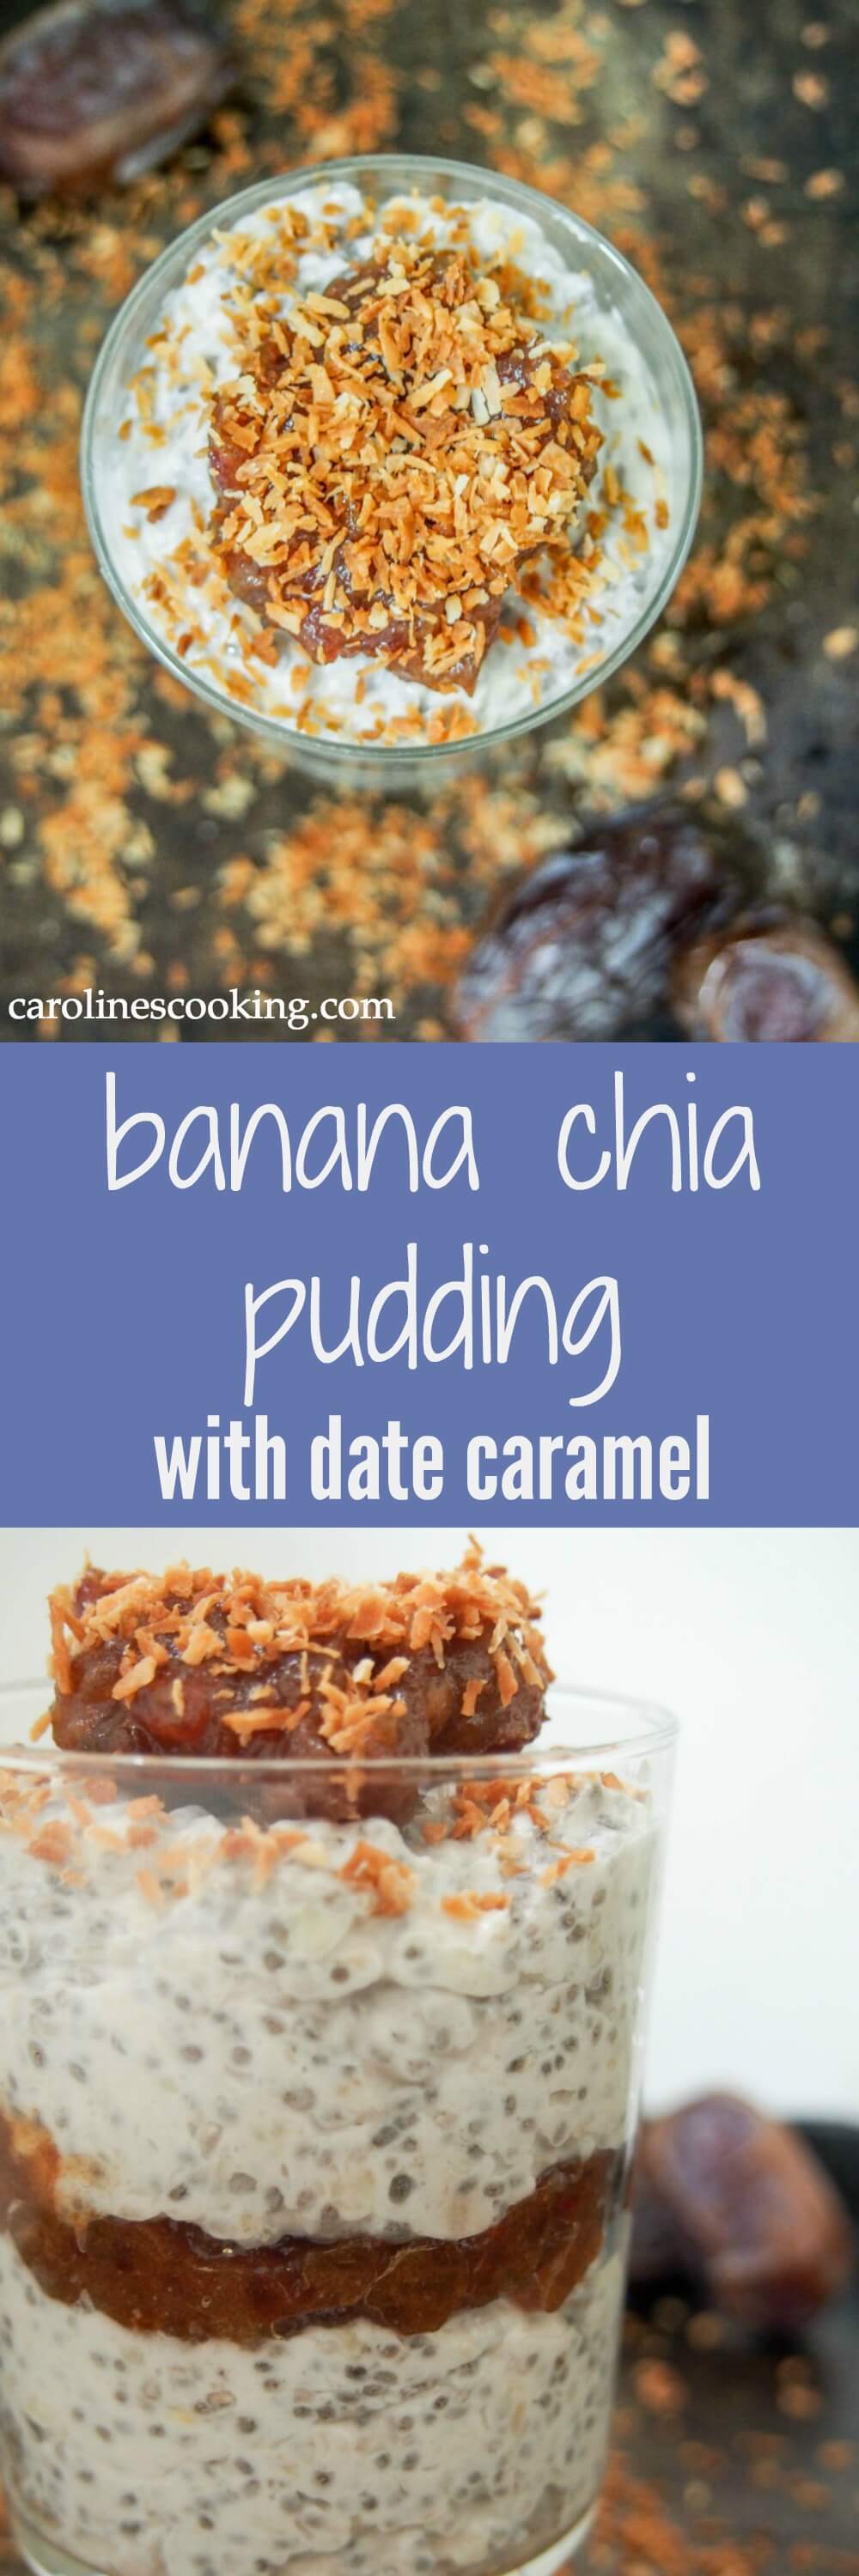 This banana chia pudding with date caramel is such a tasty breakfast / dessert that's good for you too.  Vegan, paleo, dairy & gluten free but full of flavor.